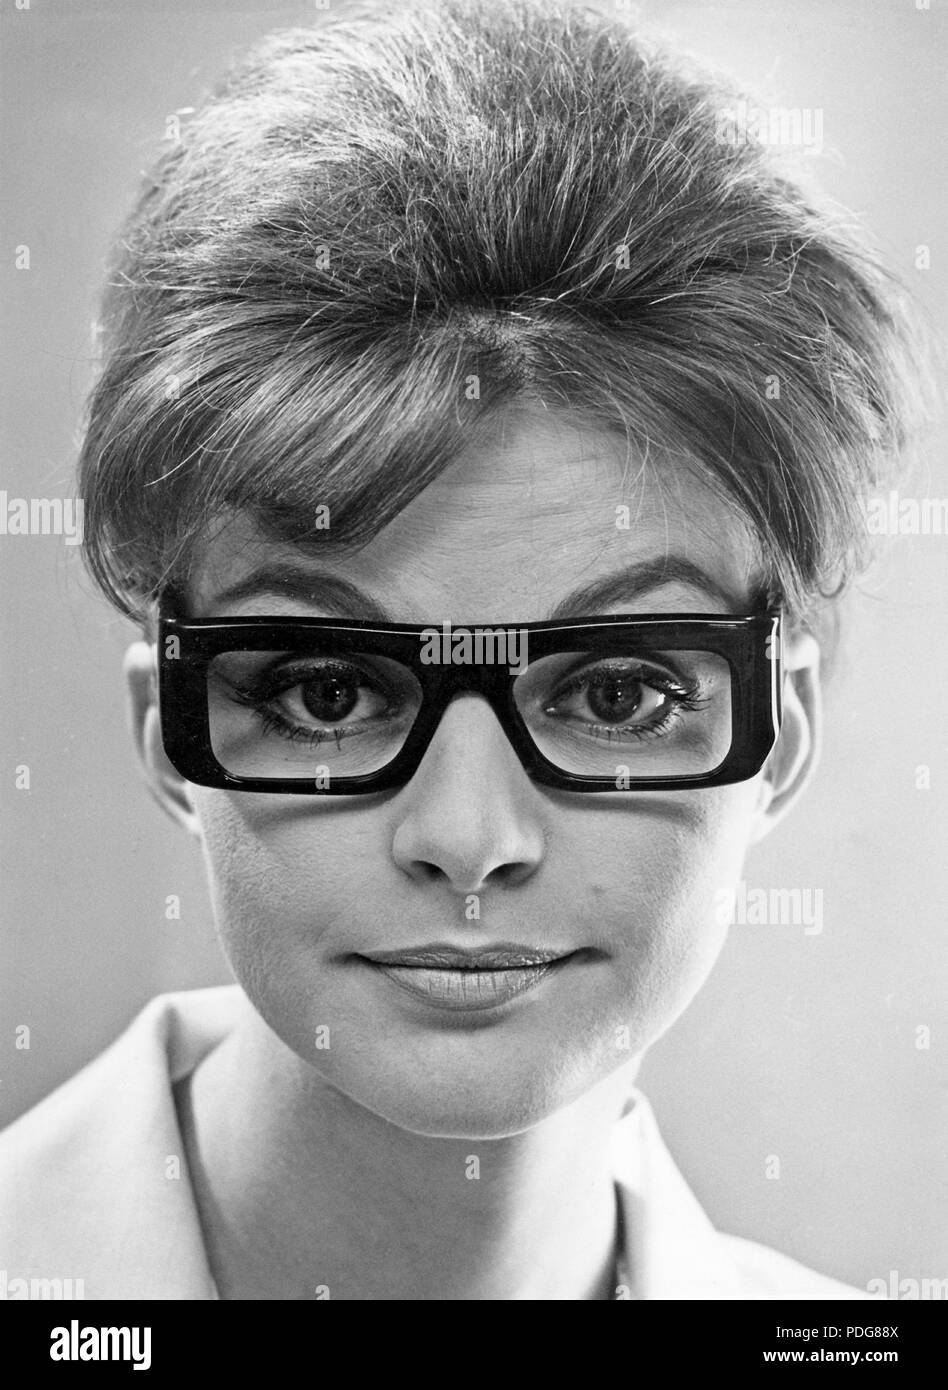 Page 2 - Wearing Glasses 1960s High Resolution Stock Photography and Images  - Alamy